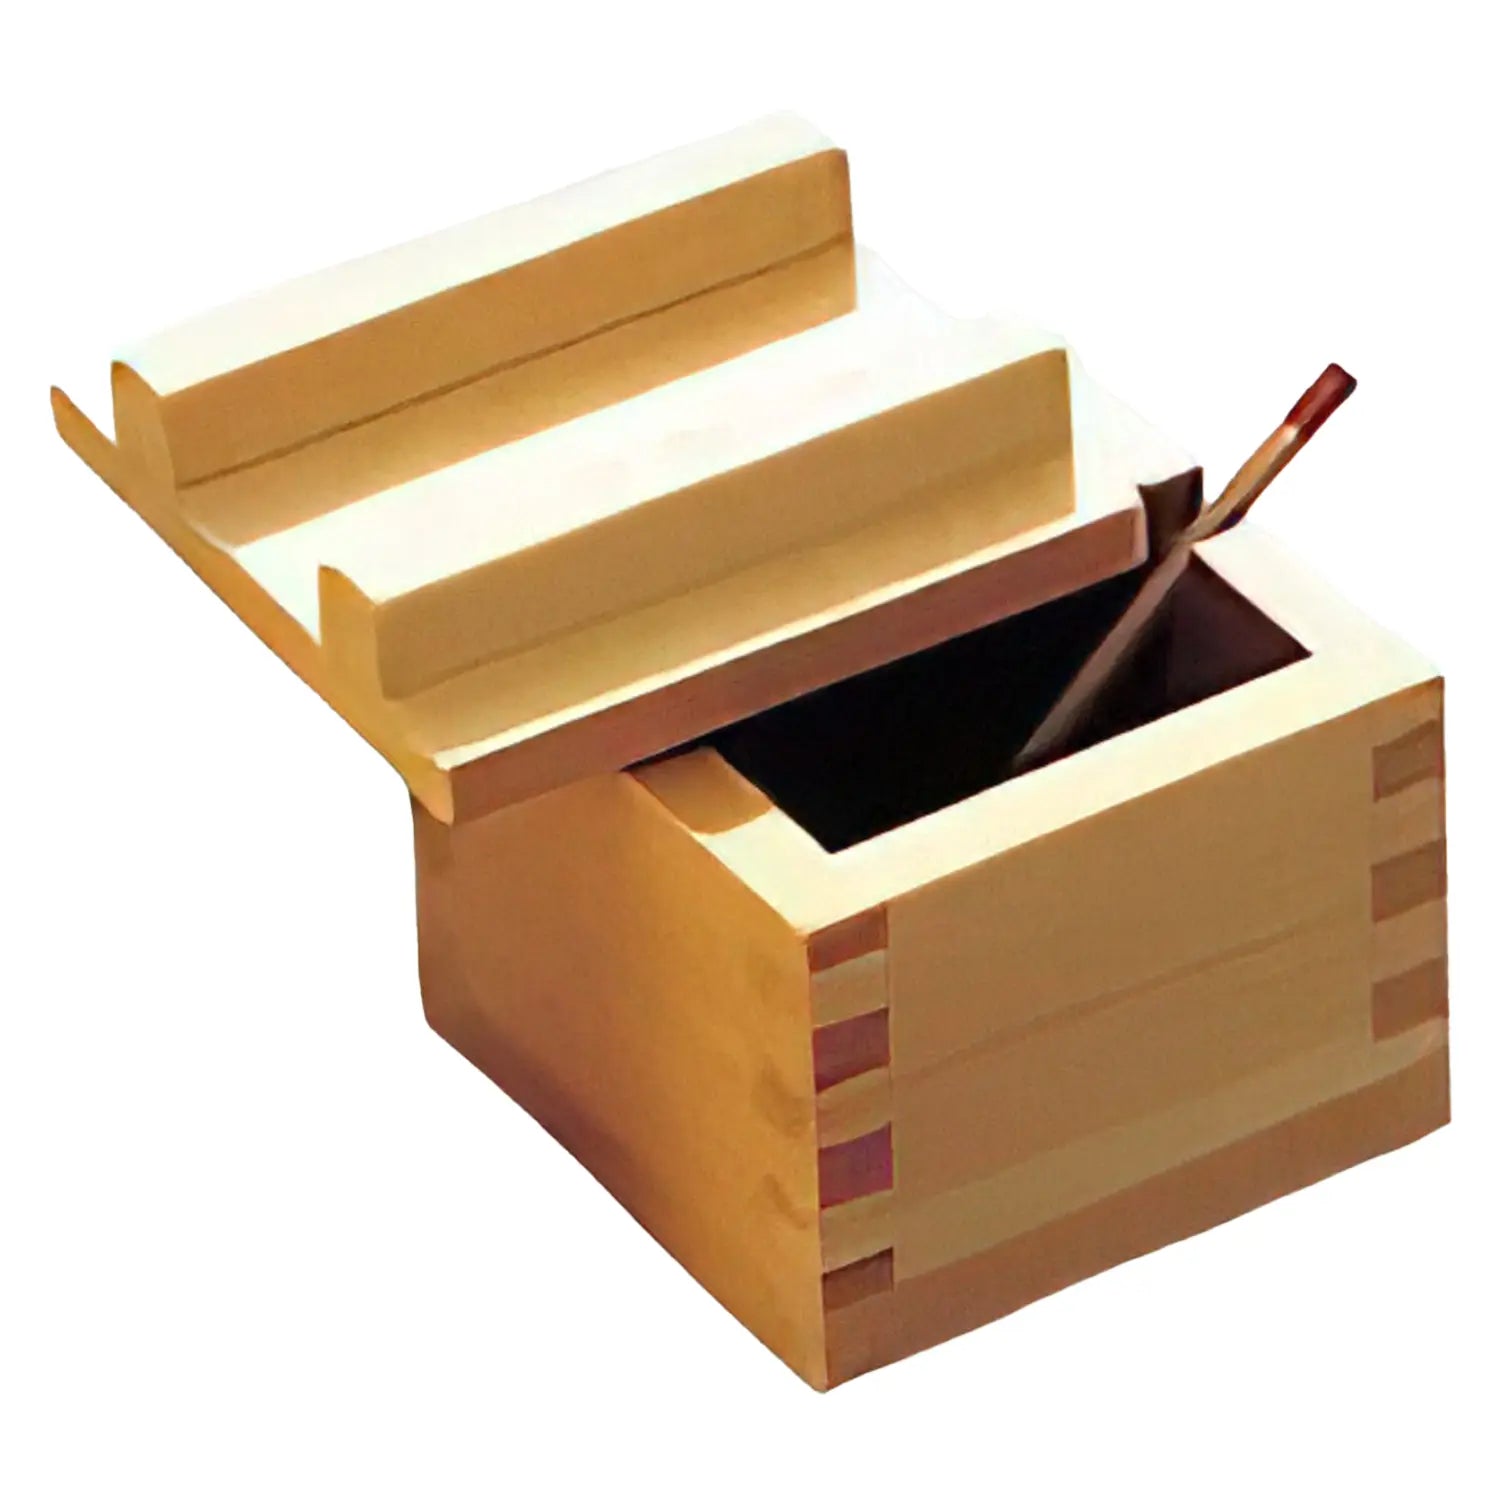 https://cdn.shopify.com/s/files/1/1610/3863/products/YamacohHinokiCypressWoodenCondimentsContainer19202_1_1600x.webp?v=1660287936